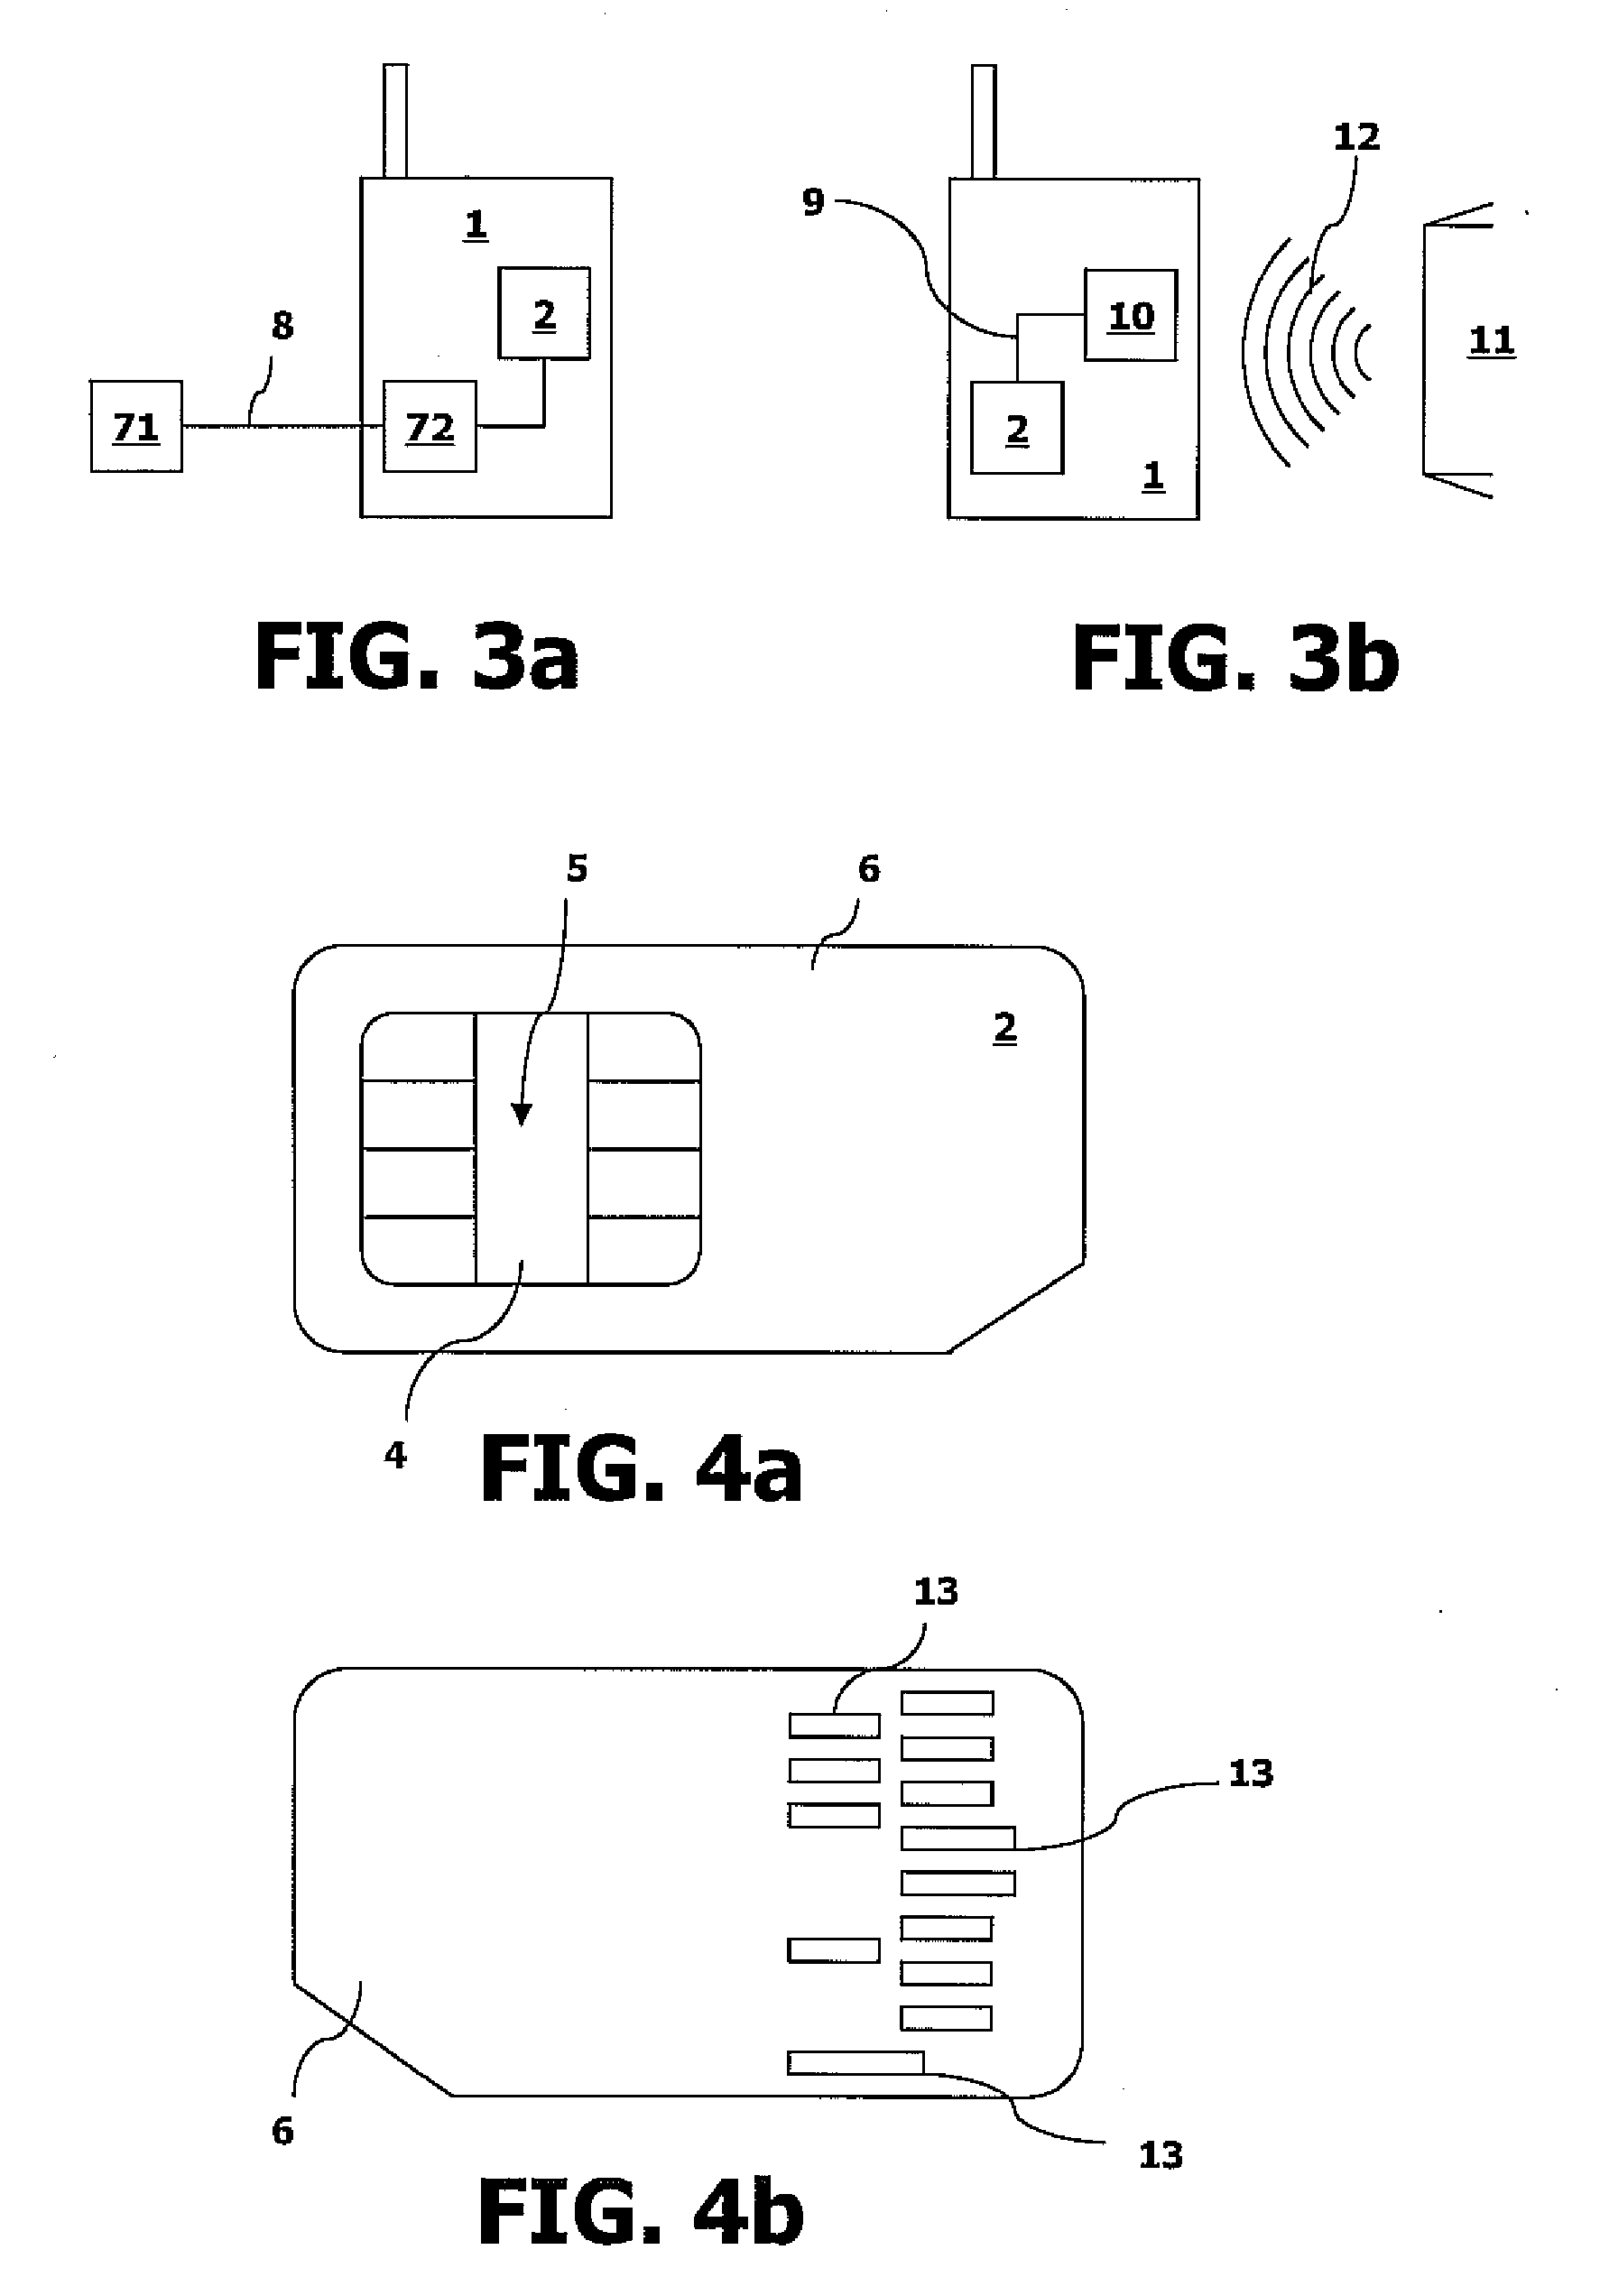 Method for a more efficient use of an interface between a smart card and a device, associated smart card and device